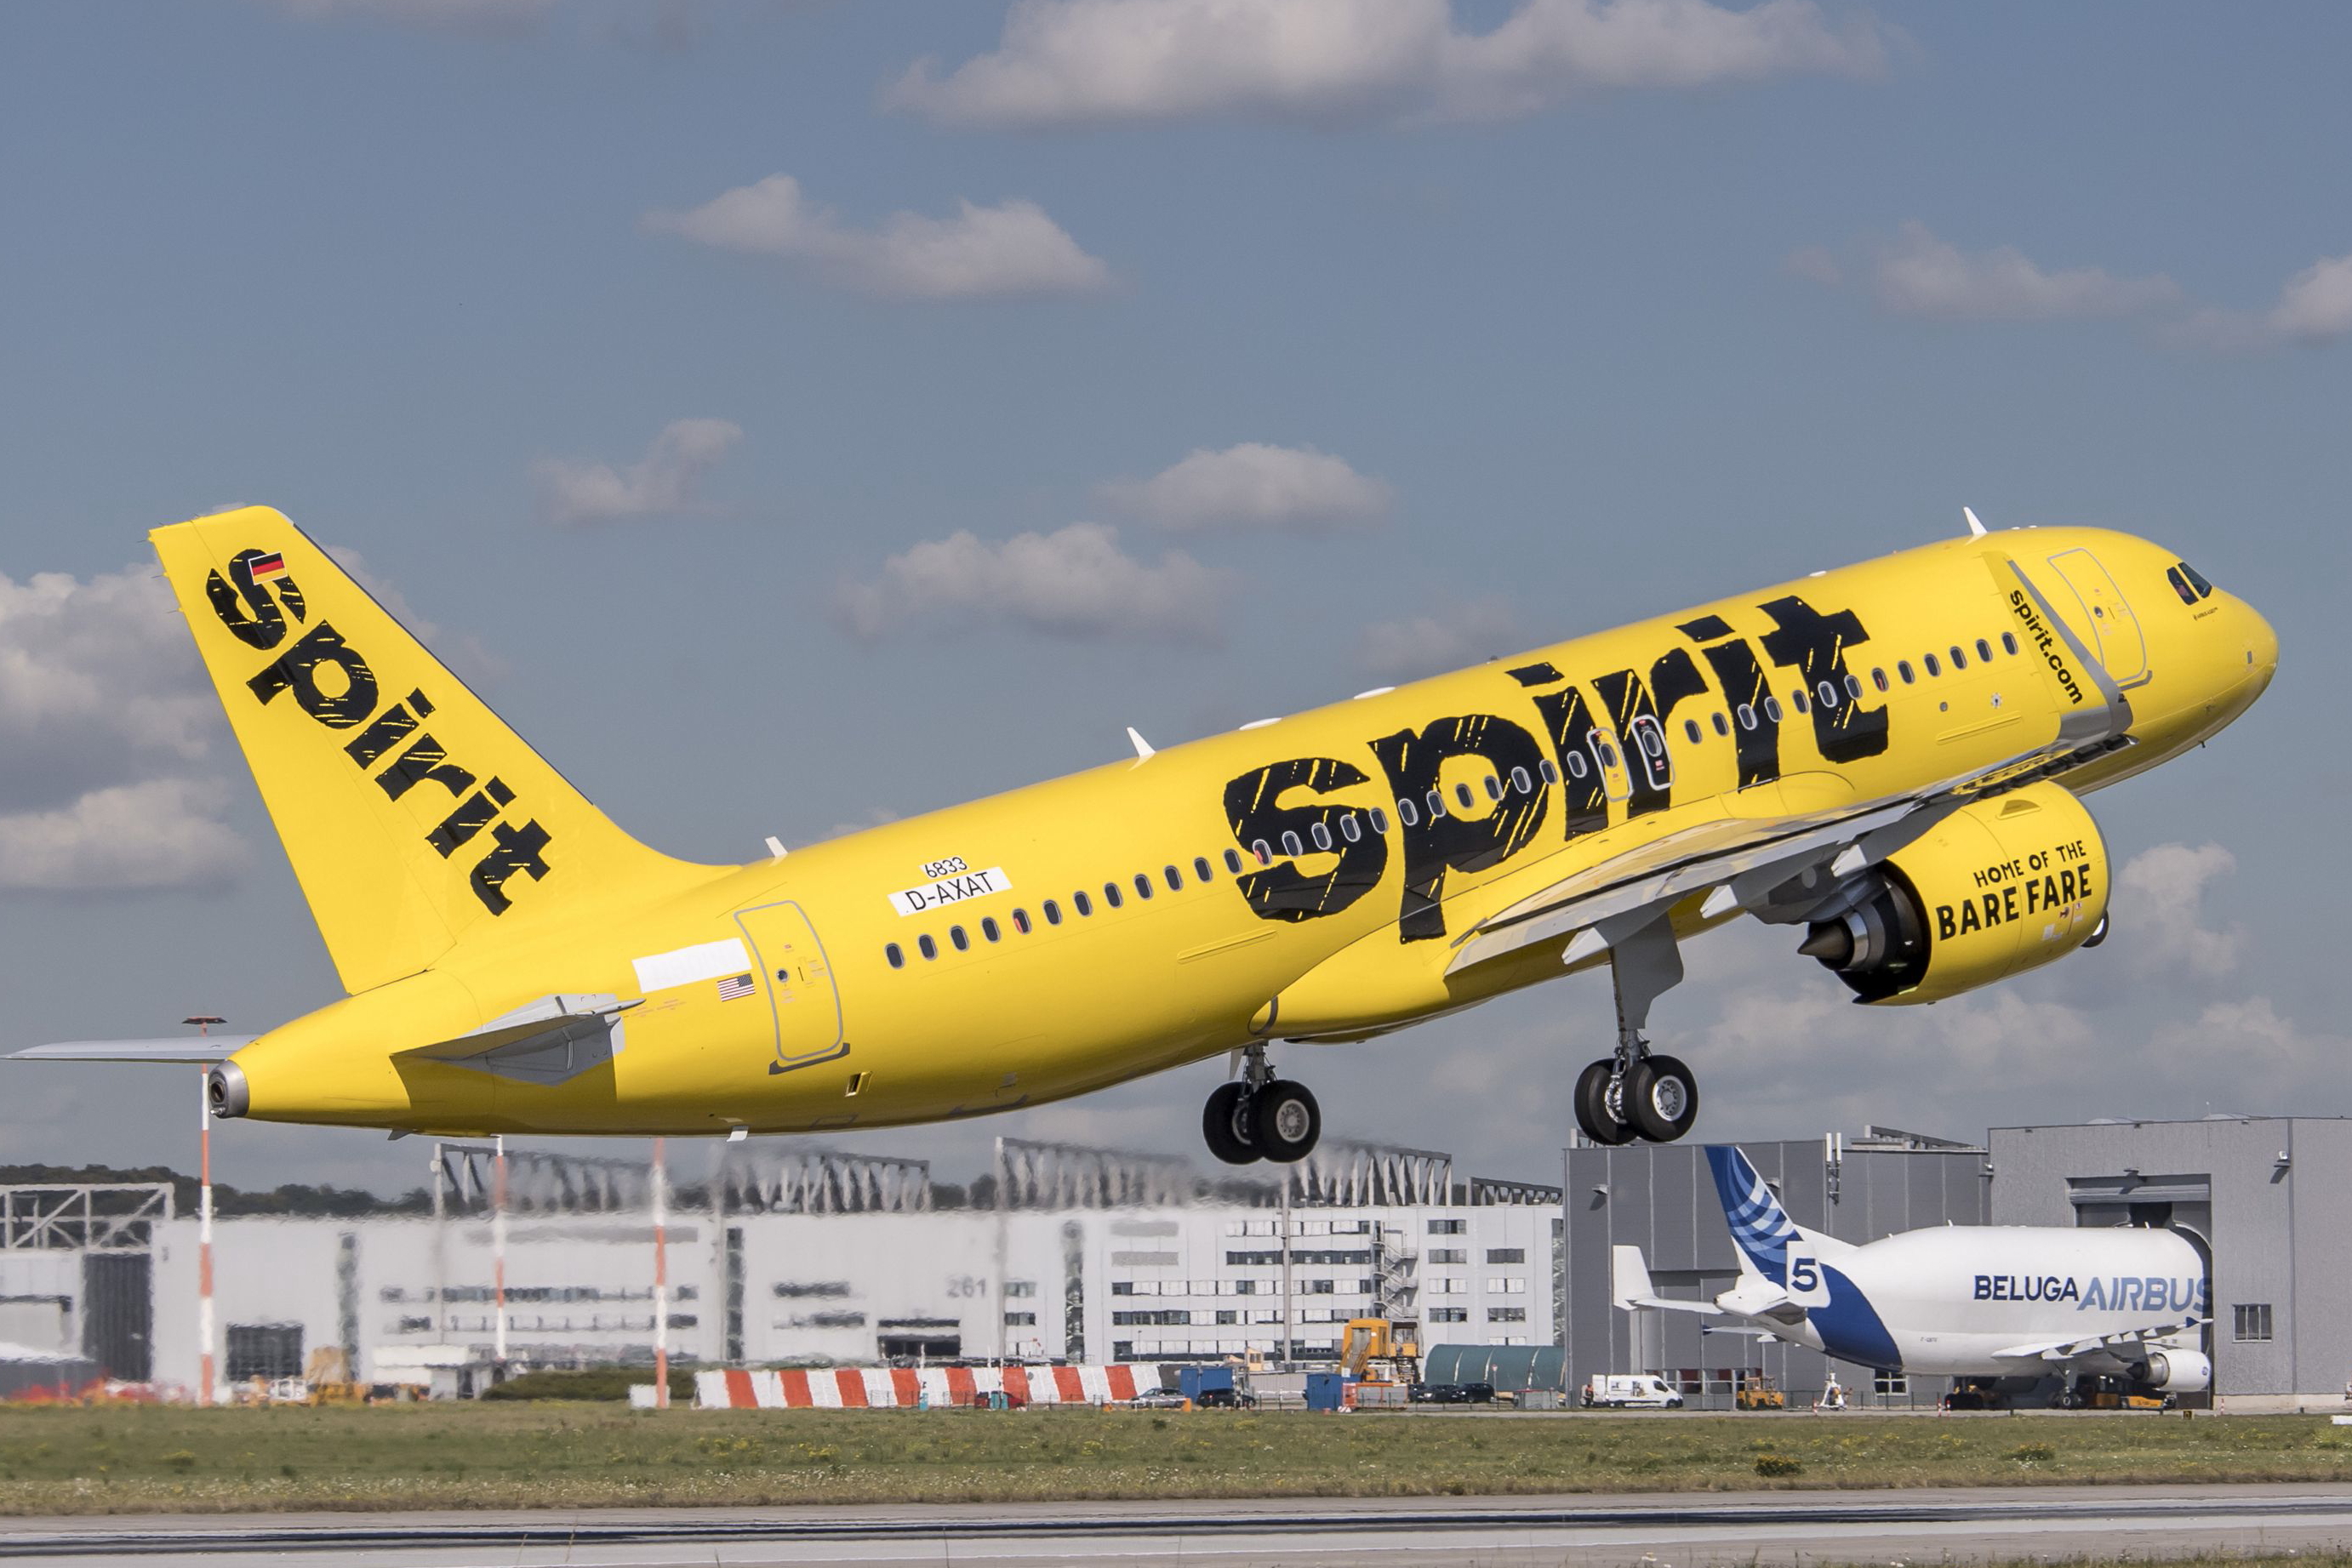 Spirit Airlines Signs Purchase Agreement for 100 Airbus A320neo Aircraft